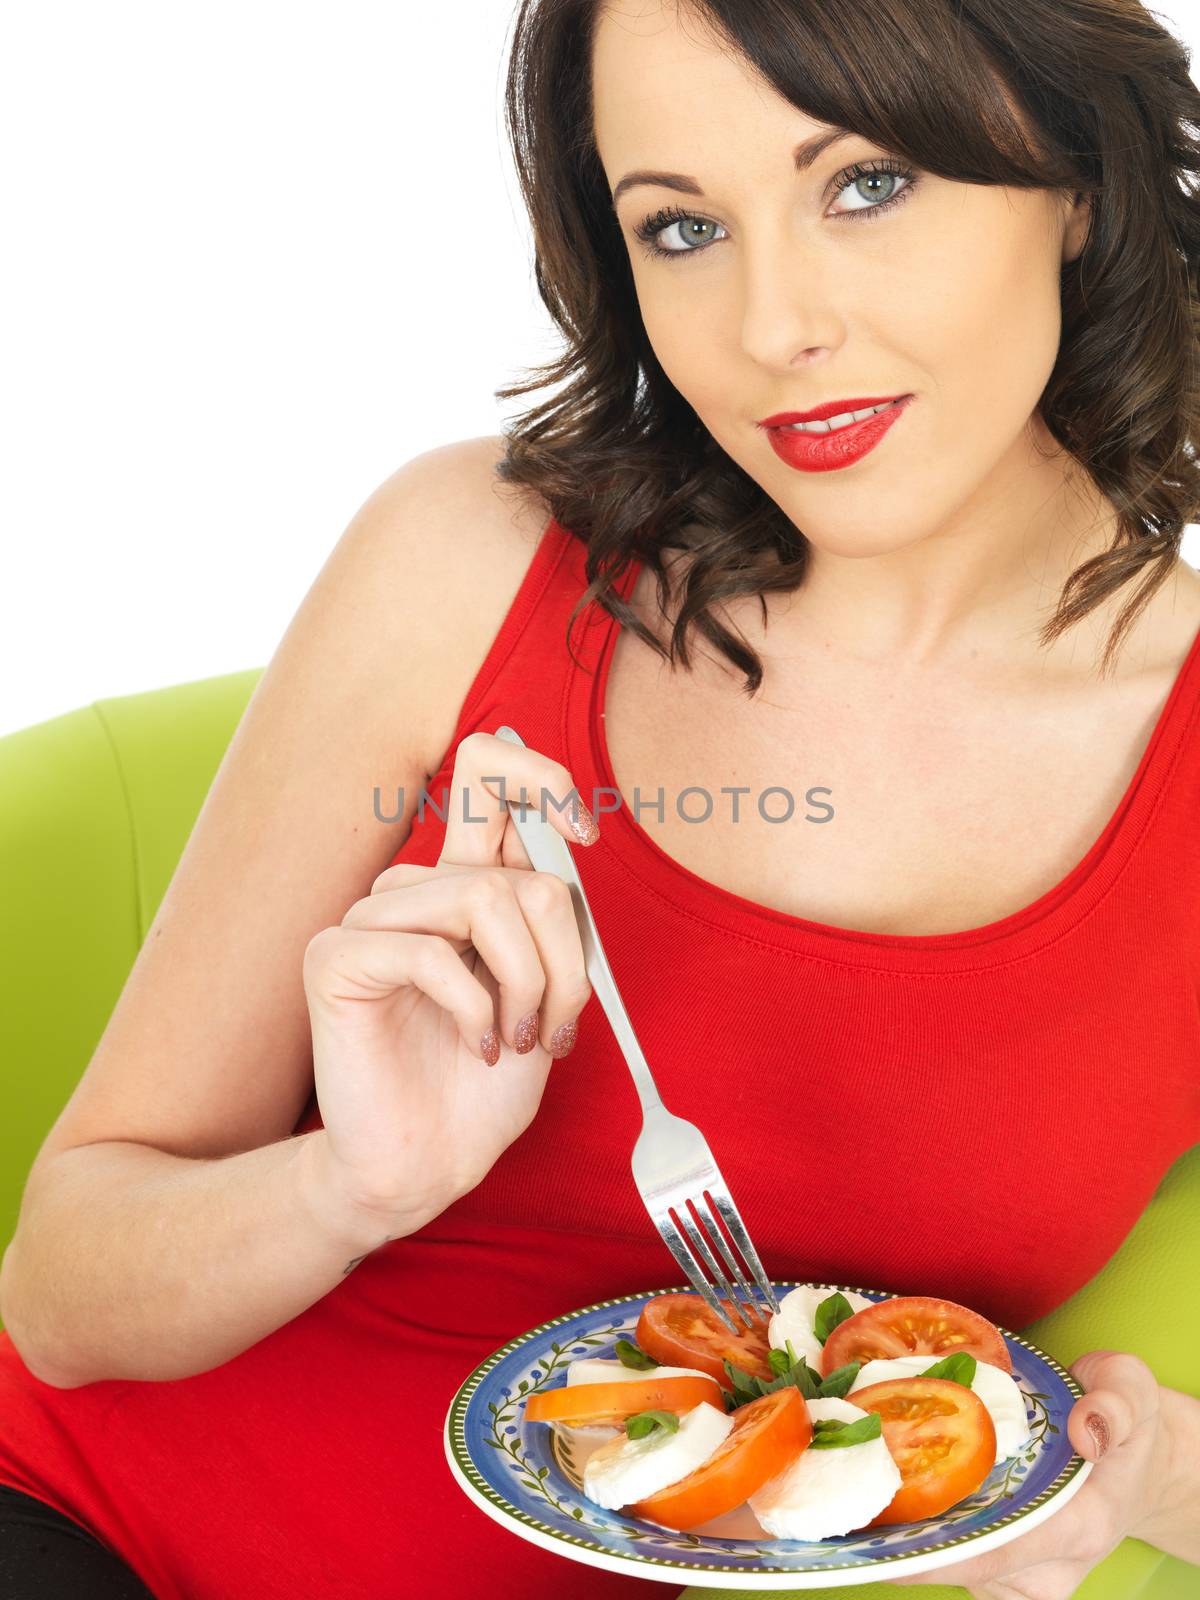 Young Woman Eating a Mozzarella Cheese and Tomato Salad by Whiteboxmedia